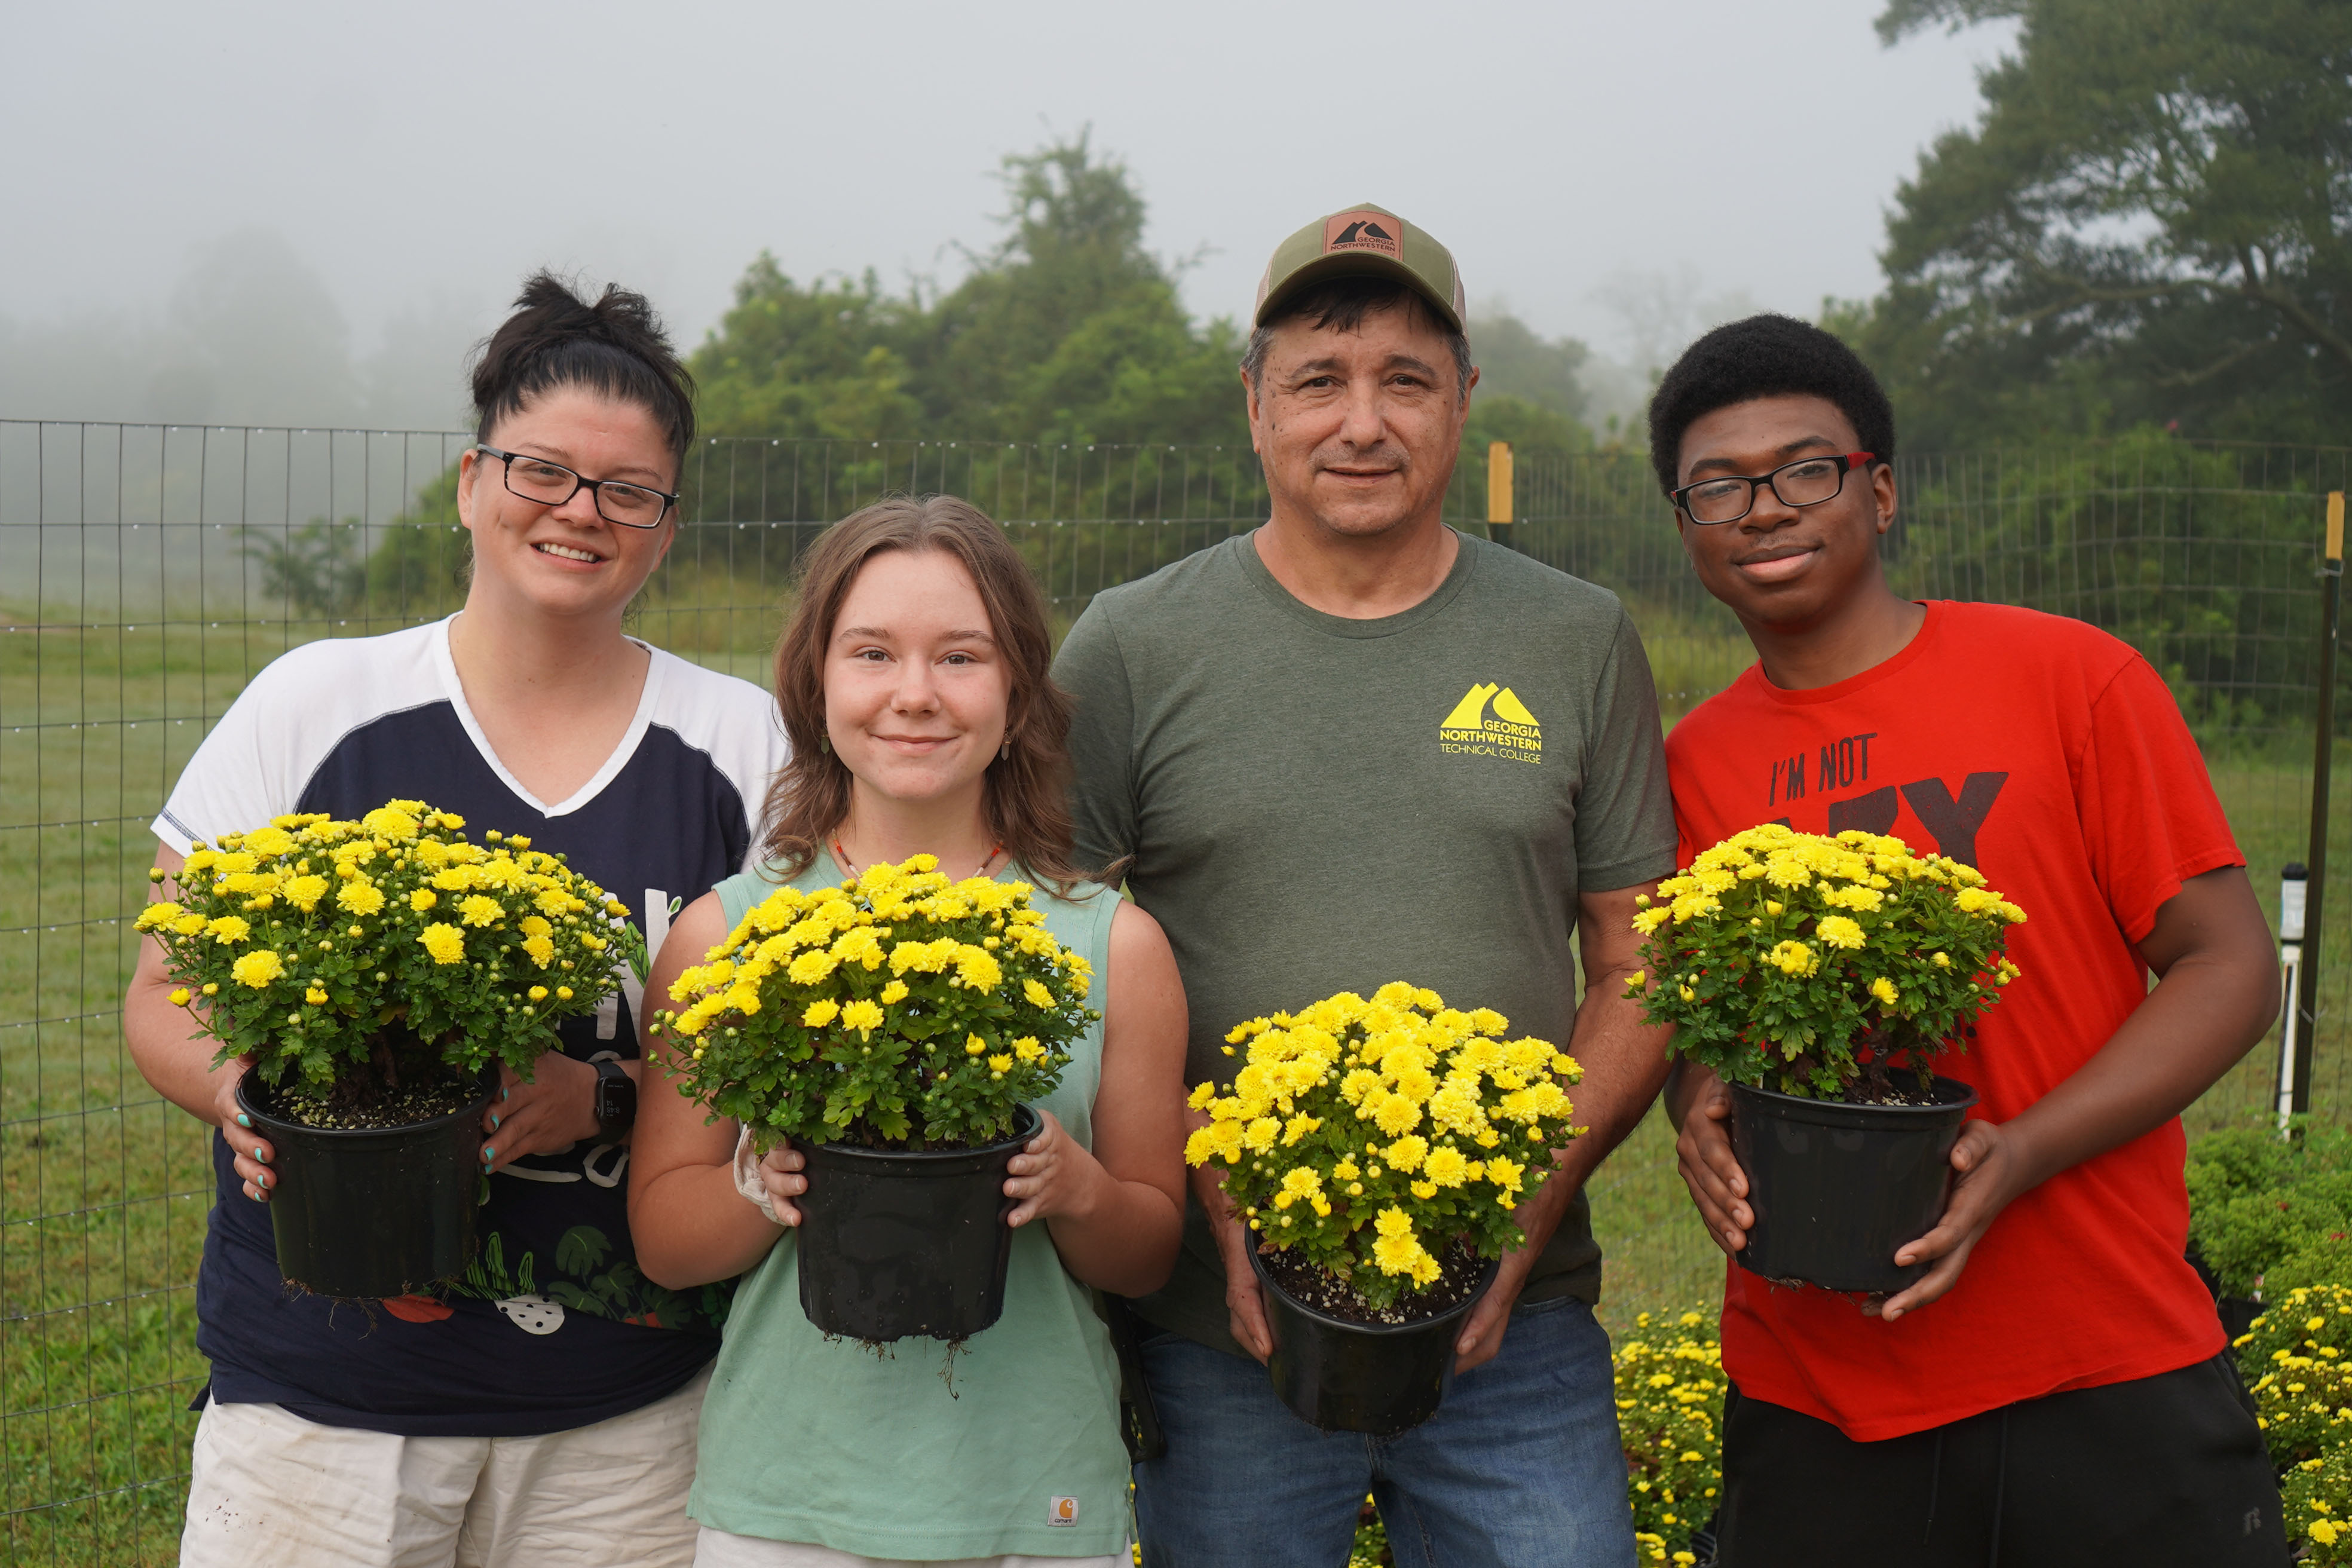 Horticulture students pose with the mums that will be on sale for $4 each at GNTC’s Floyd County Campus starting Sept. 21. (From left to right) Jennifer Clark, of Kingston; Alisha Jackson, of LaFayette; Nick Barton, director of GNTC’s Horticulture program; and Timothy Roberts, of Rome.
